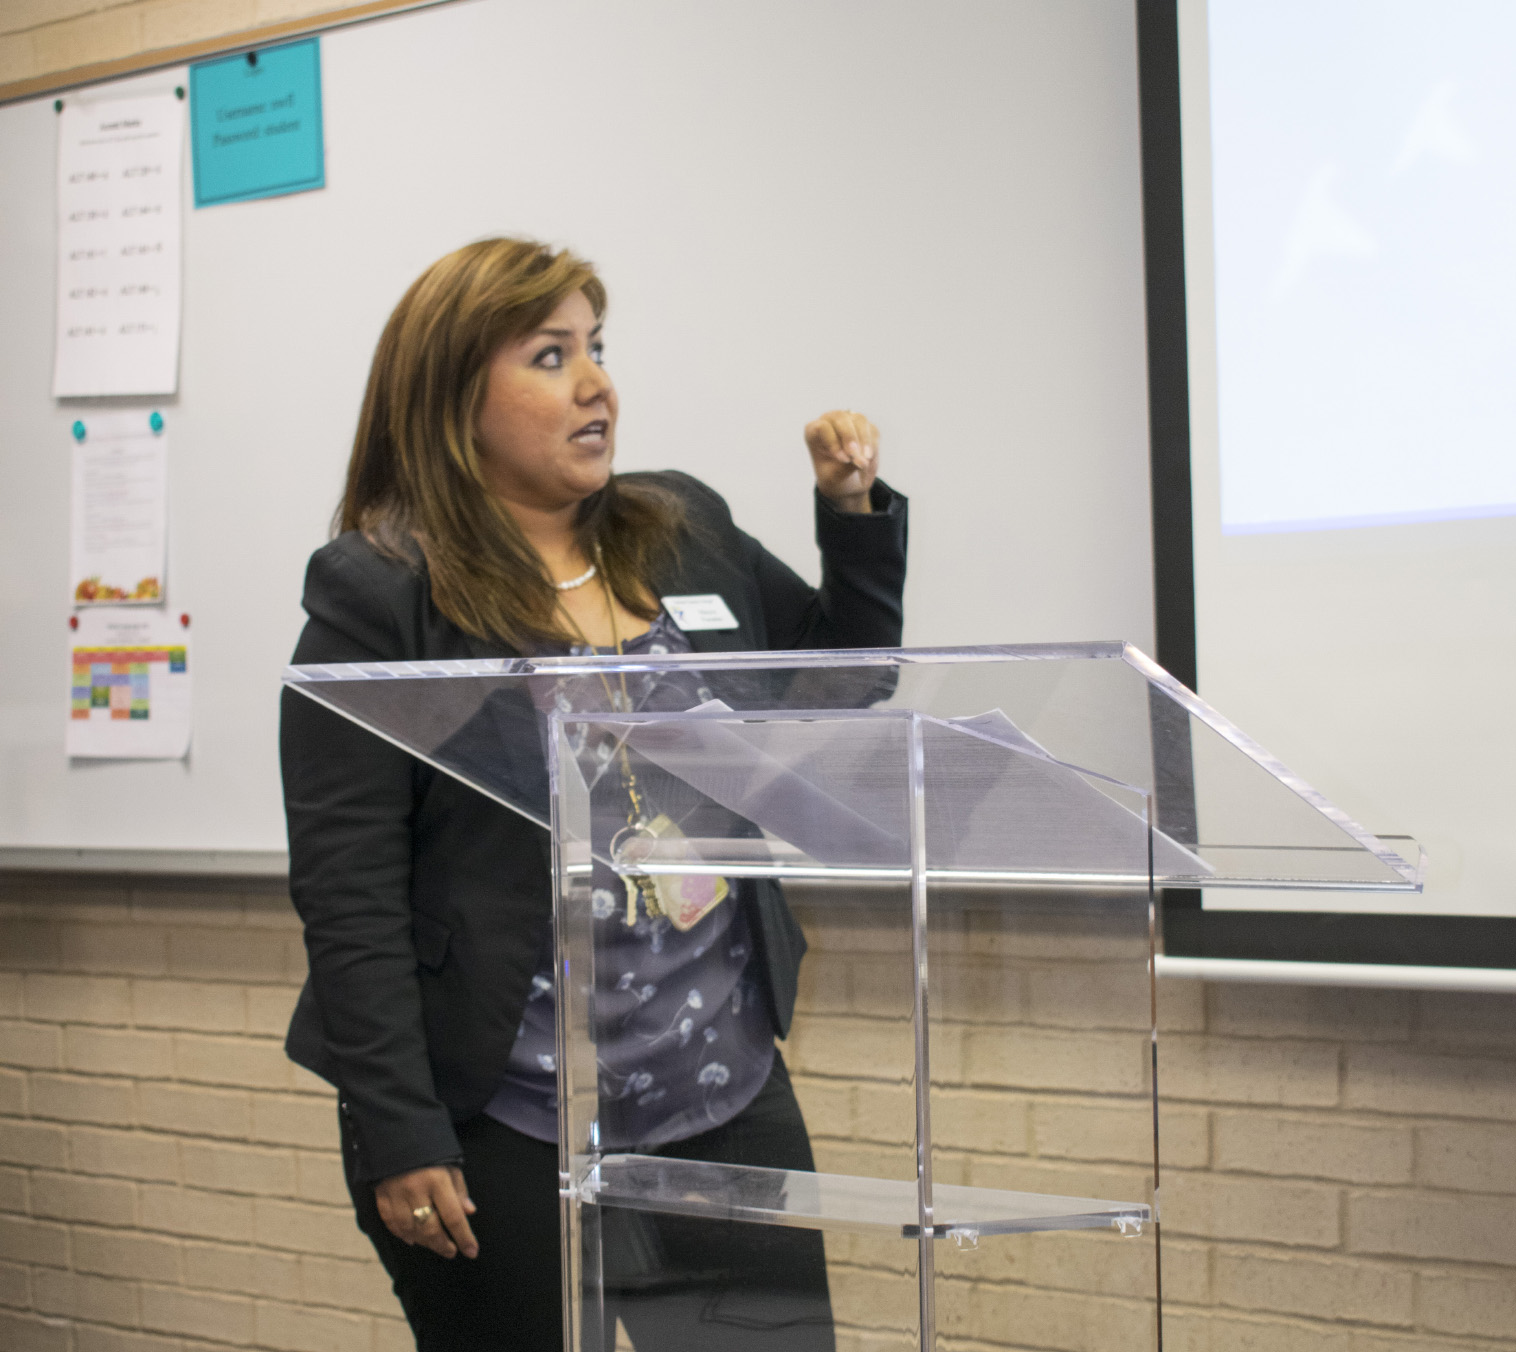 Spanish associate professor Mayra Fuentes shares her story Sept. 27 at the Latino Culture Series event on NW Campus.